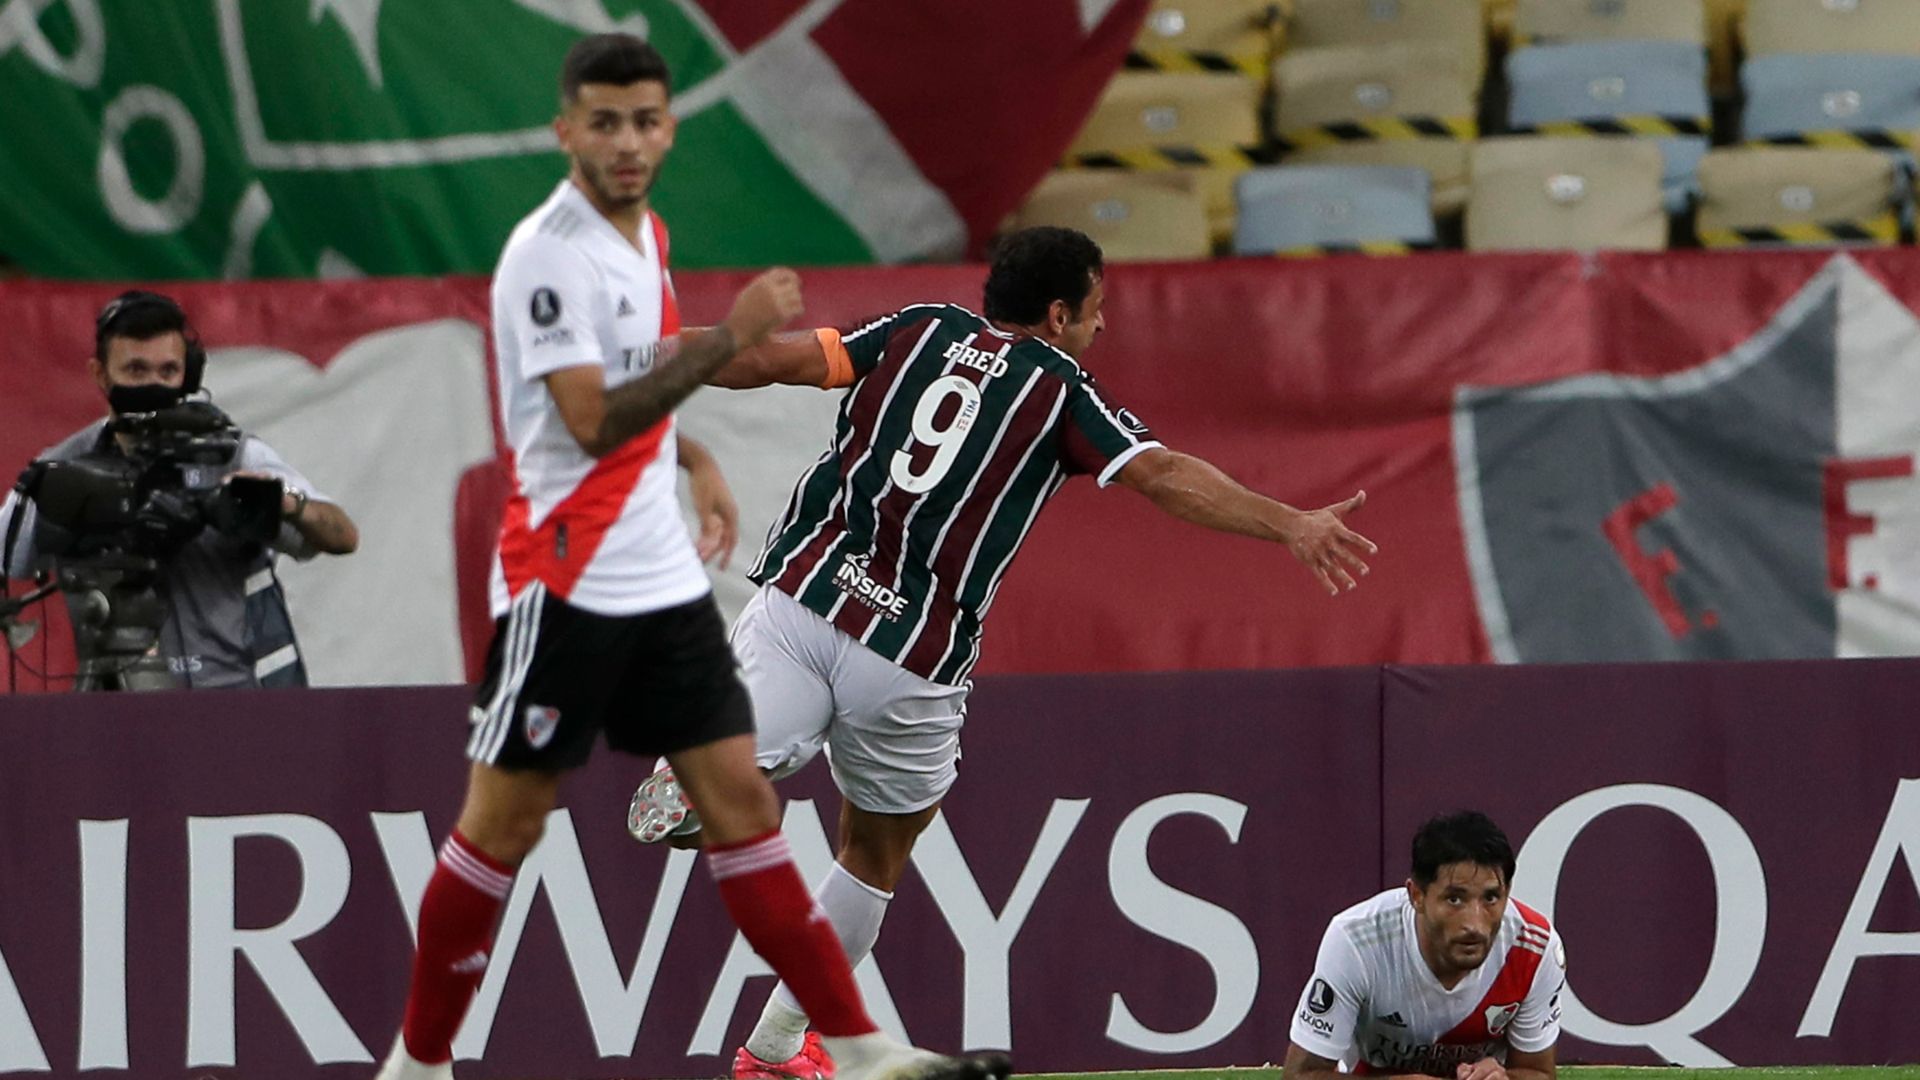 In the 2021 clash, Fred scored Fluminense's goal at Maracanã (Credit: Getty Images)